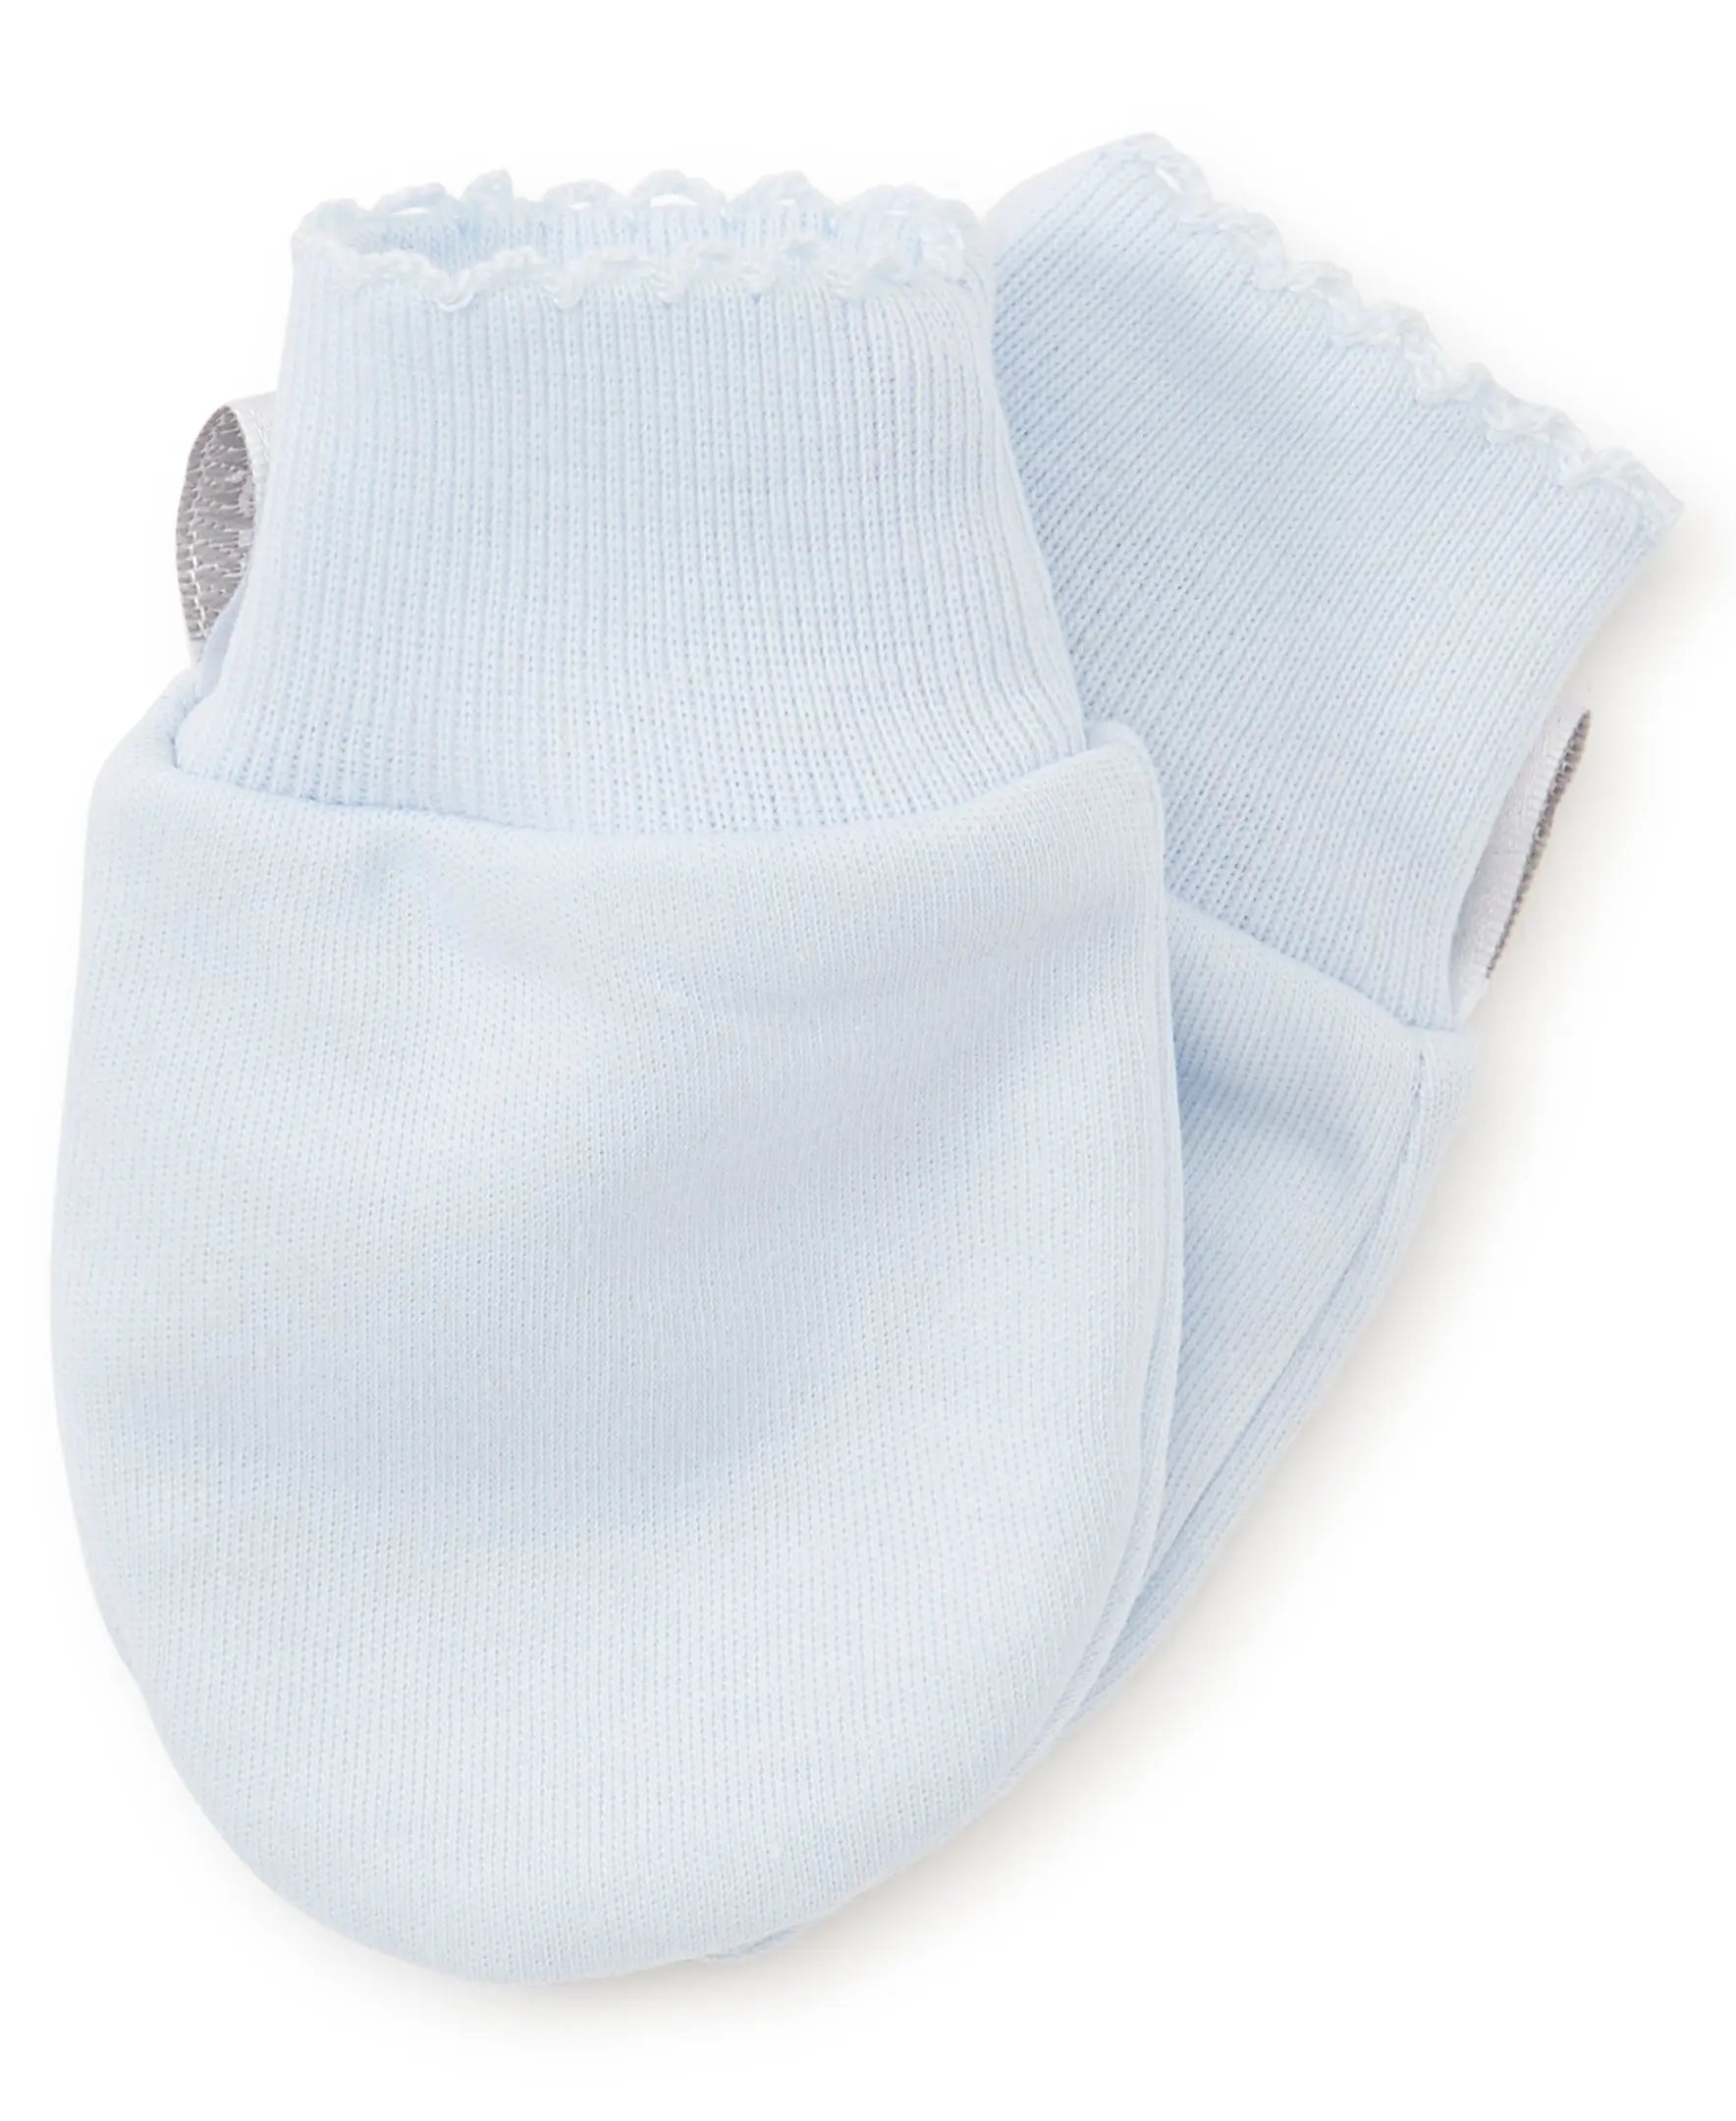 Baby boys mittens - solid blue-Booties, mittens & hats-Kissy Kissy-Blue Almonds-London-South Kensington